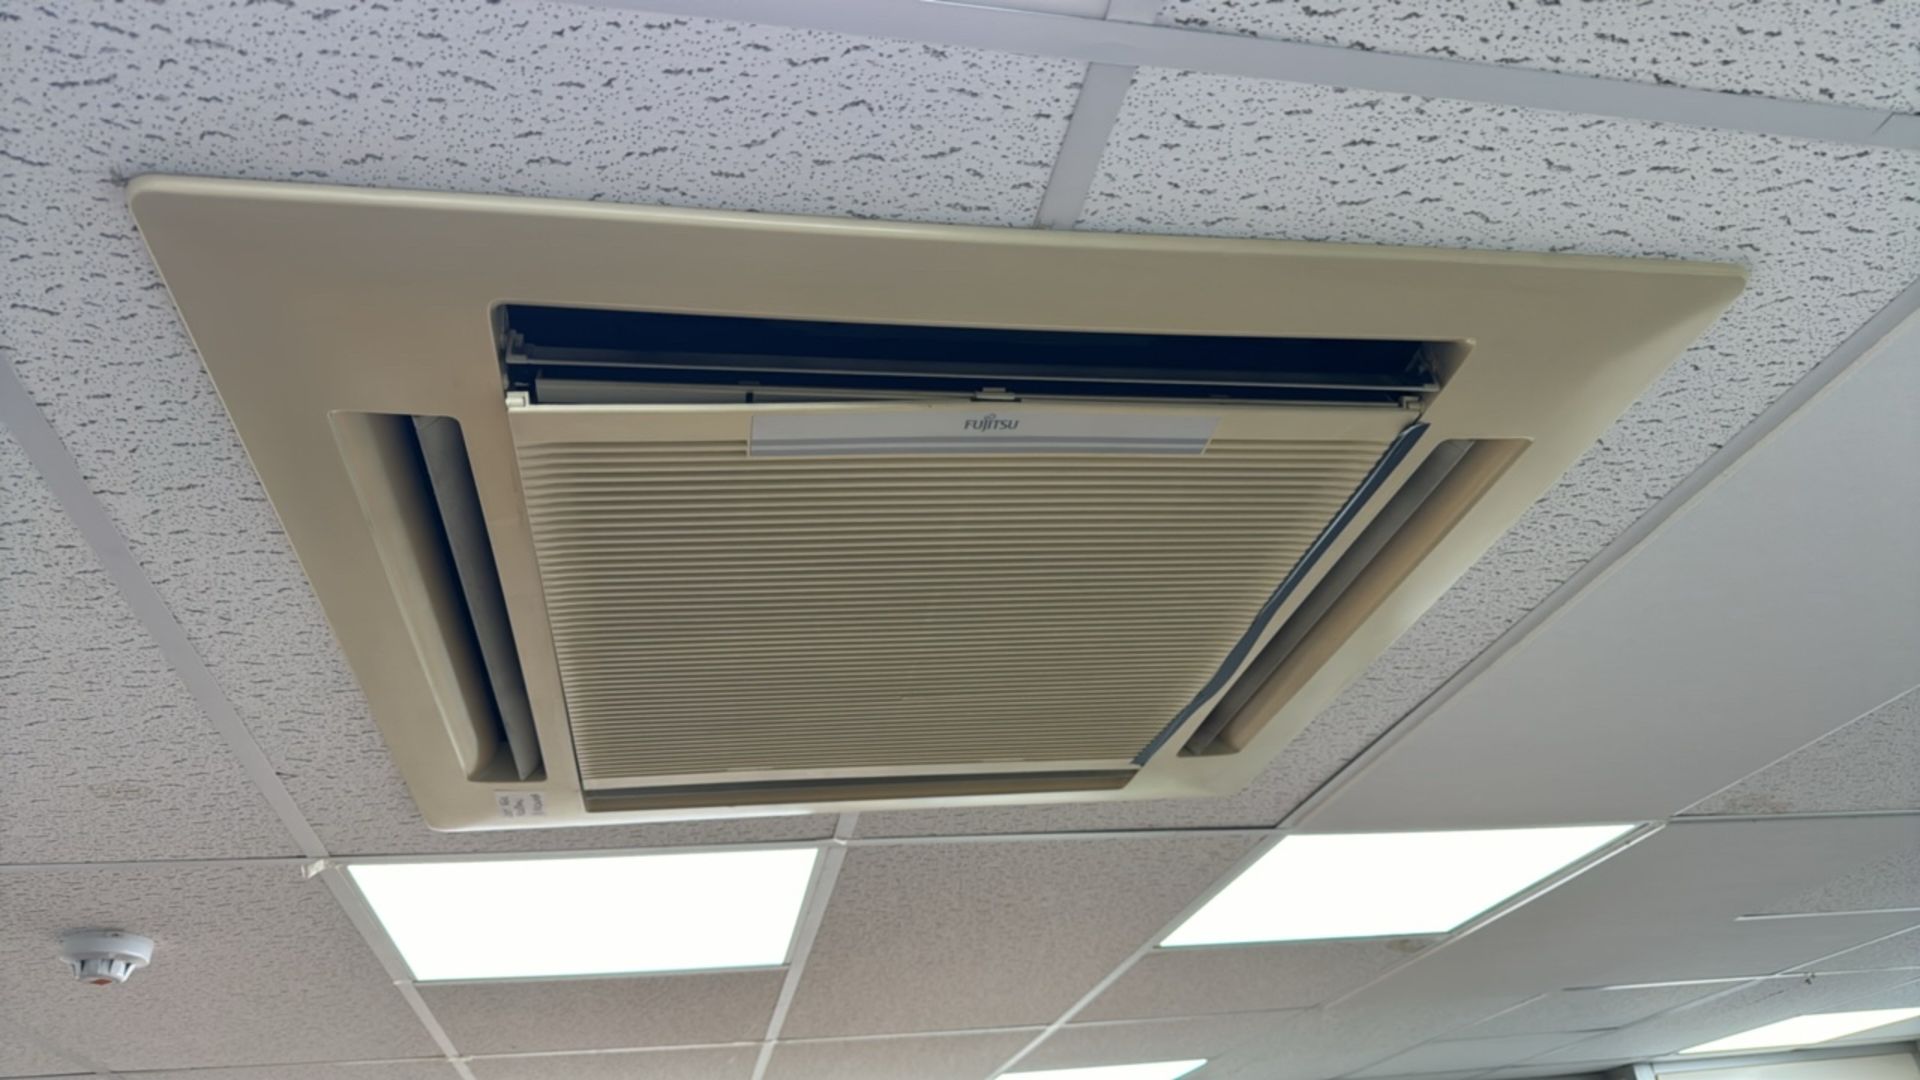 Fujitsu Air Conditioning Ceiling Cassette - Image 2 of 5